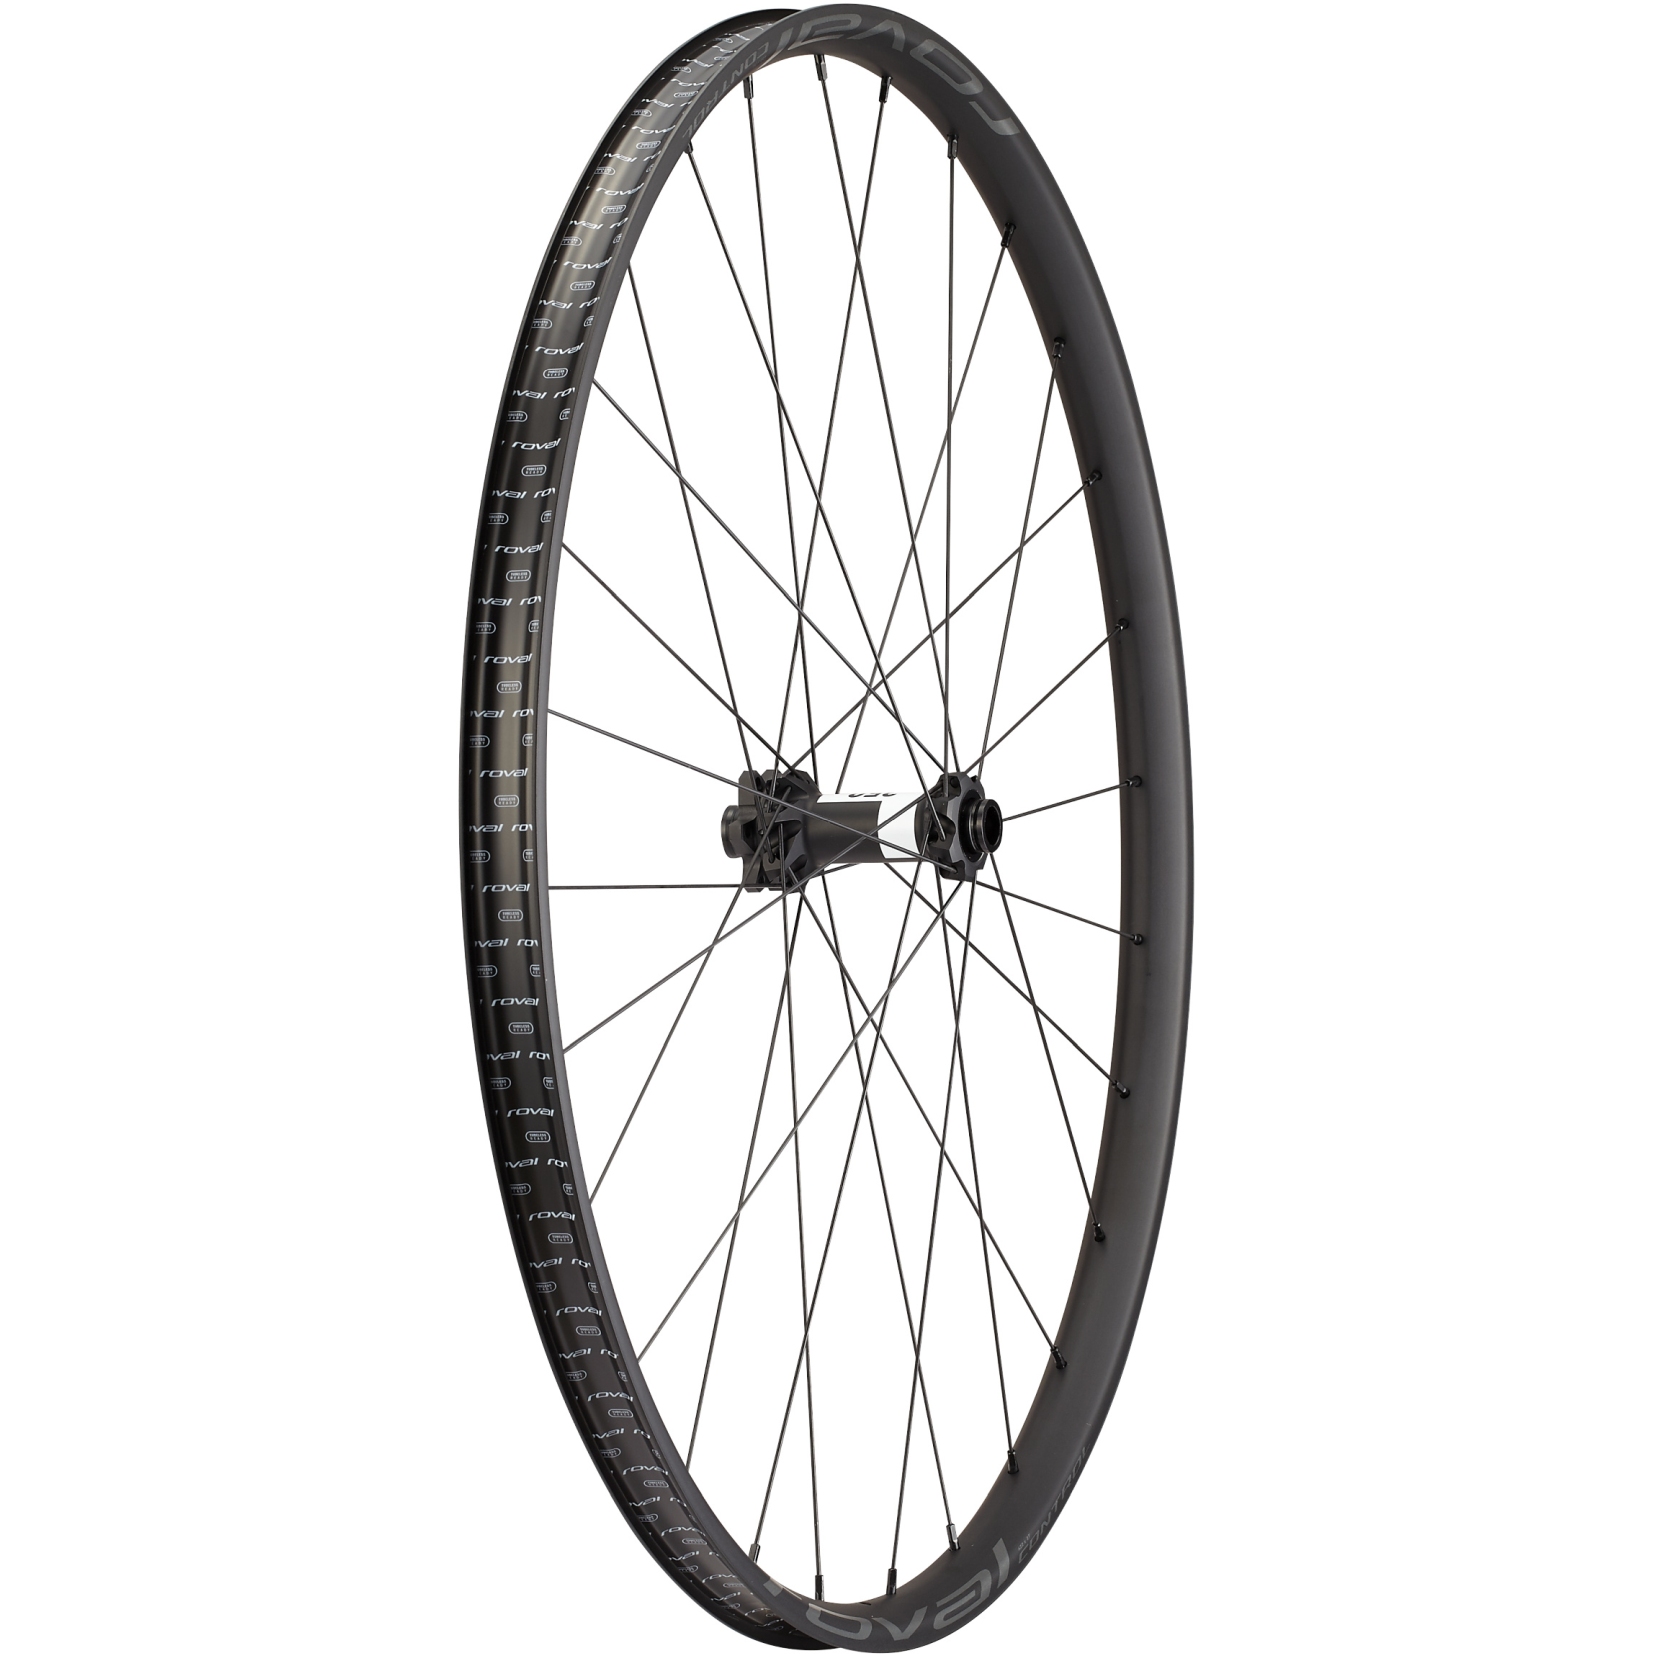 Productfoto van Specialized Roval Control Alloy 350 Voorwiel - 29&quot; | 6-bolt | 15x110 mm - Black/Charcoal